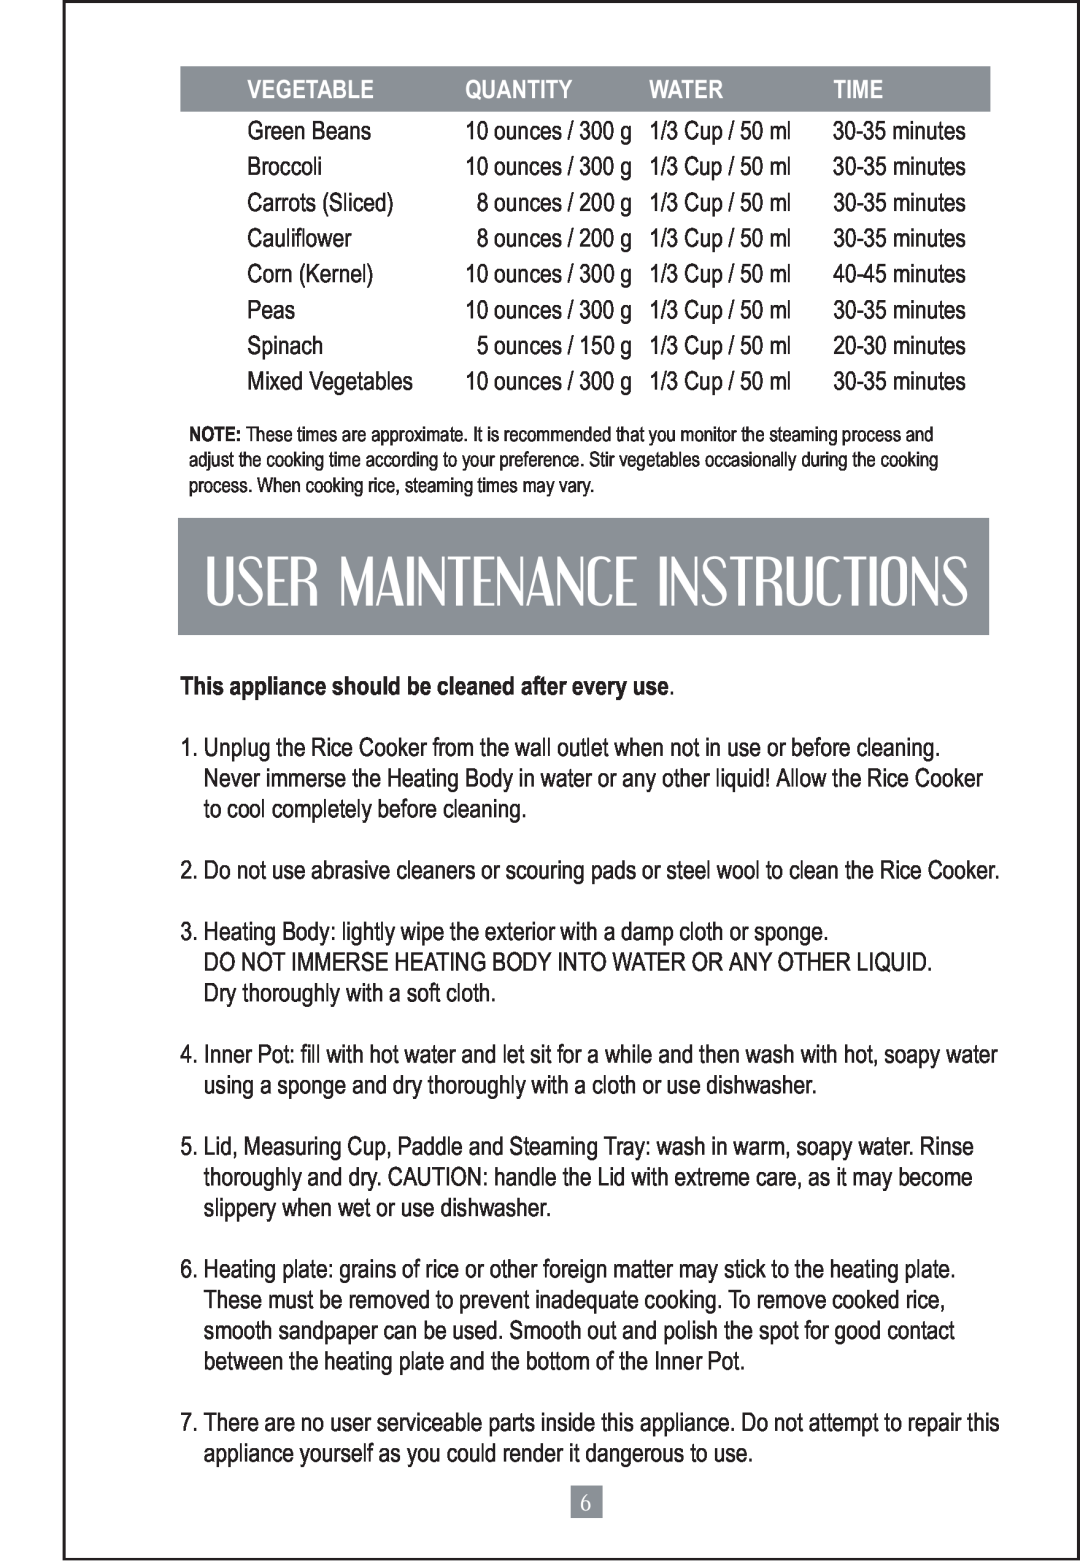 Oster 4728 This appliance should be cleaned after every use, User Maintenance Instructions, Vegetable, Quantity, Water 